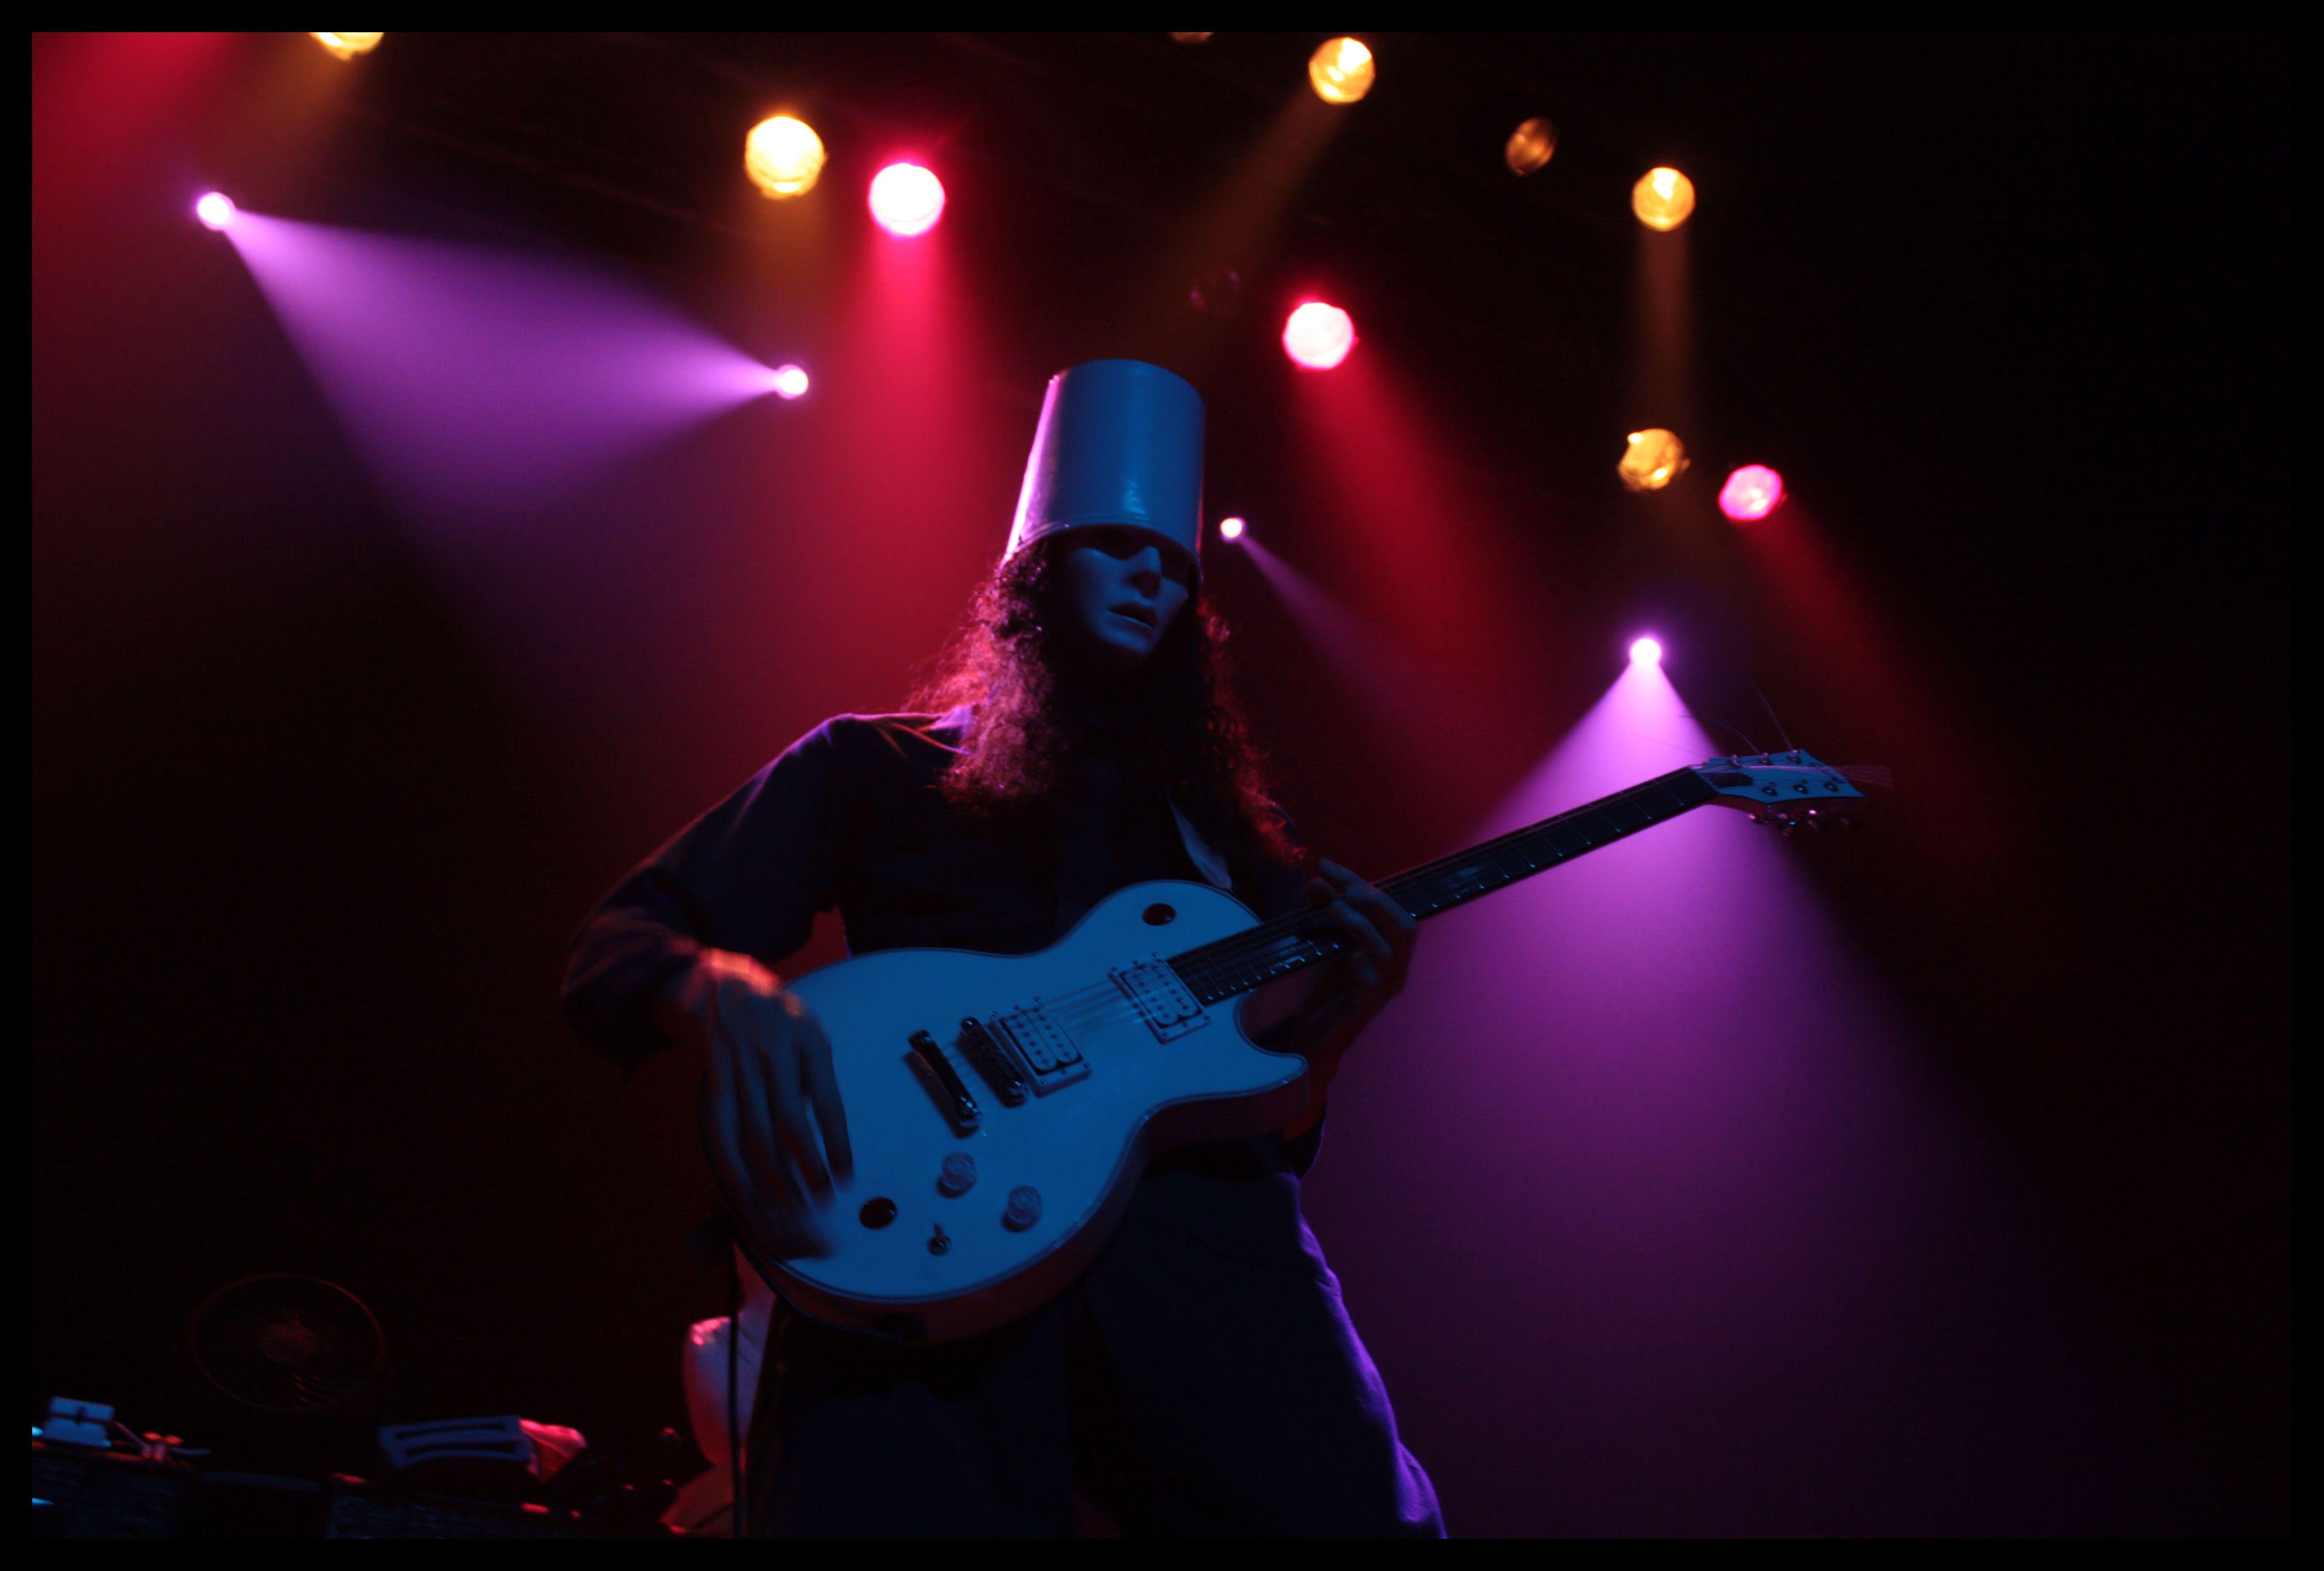 Buckethead 4k Ultra HD Wallpaper and Background Imagex2970